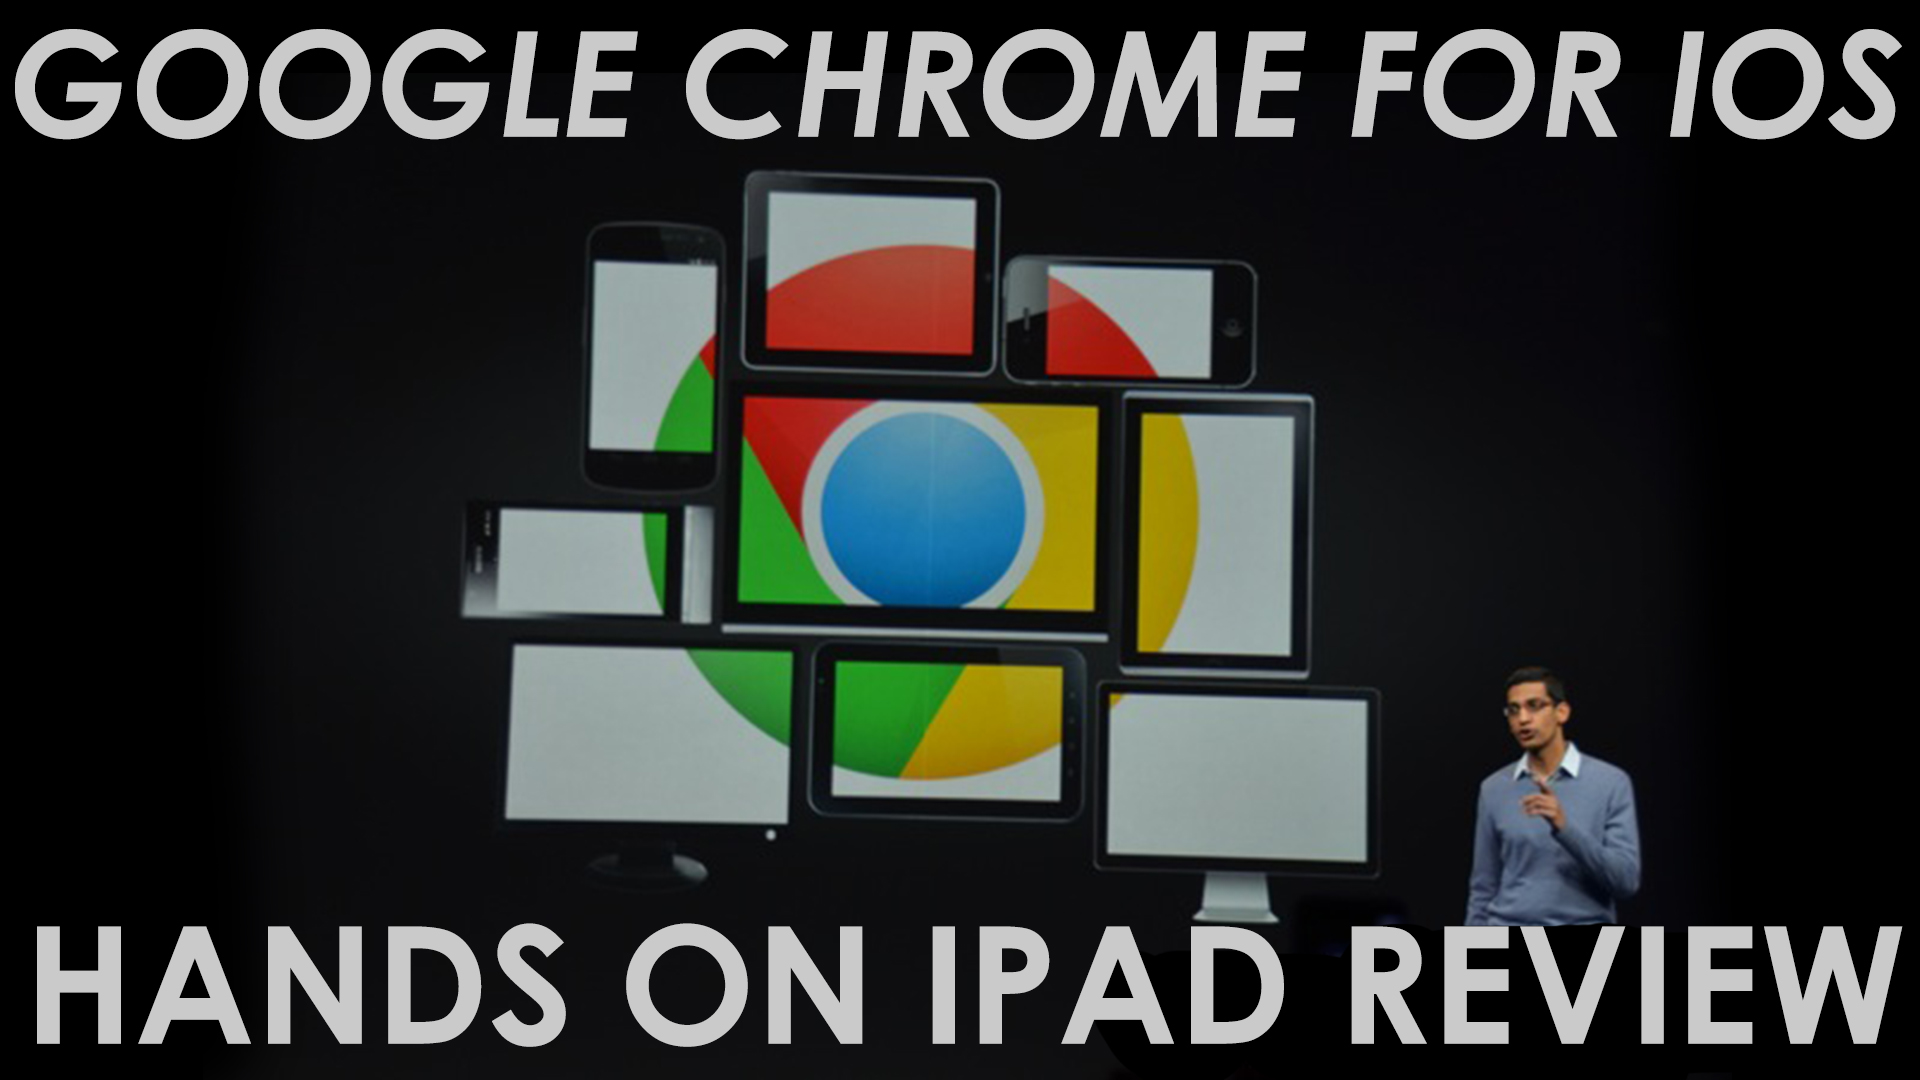 Google Chrome for iPad Hands On [REVIEW]